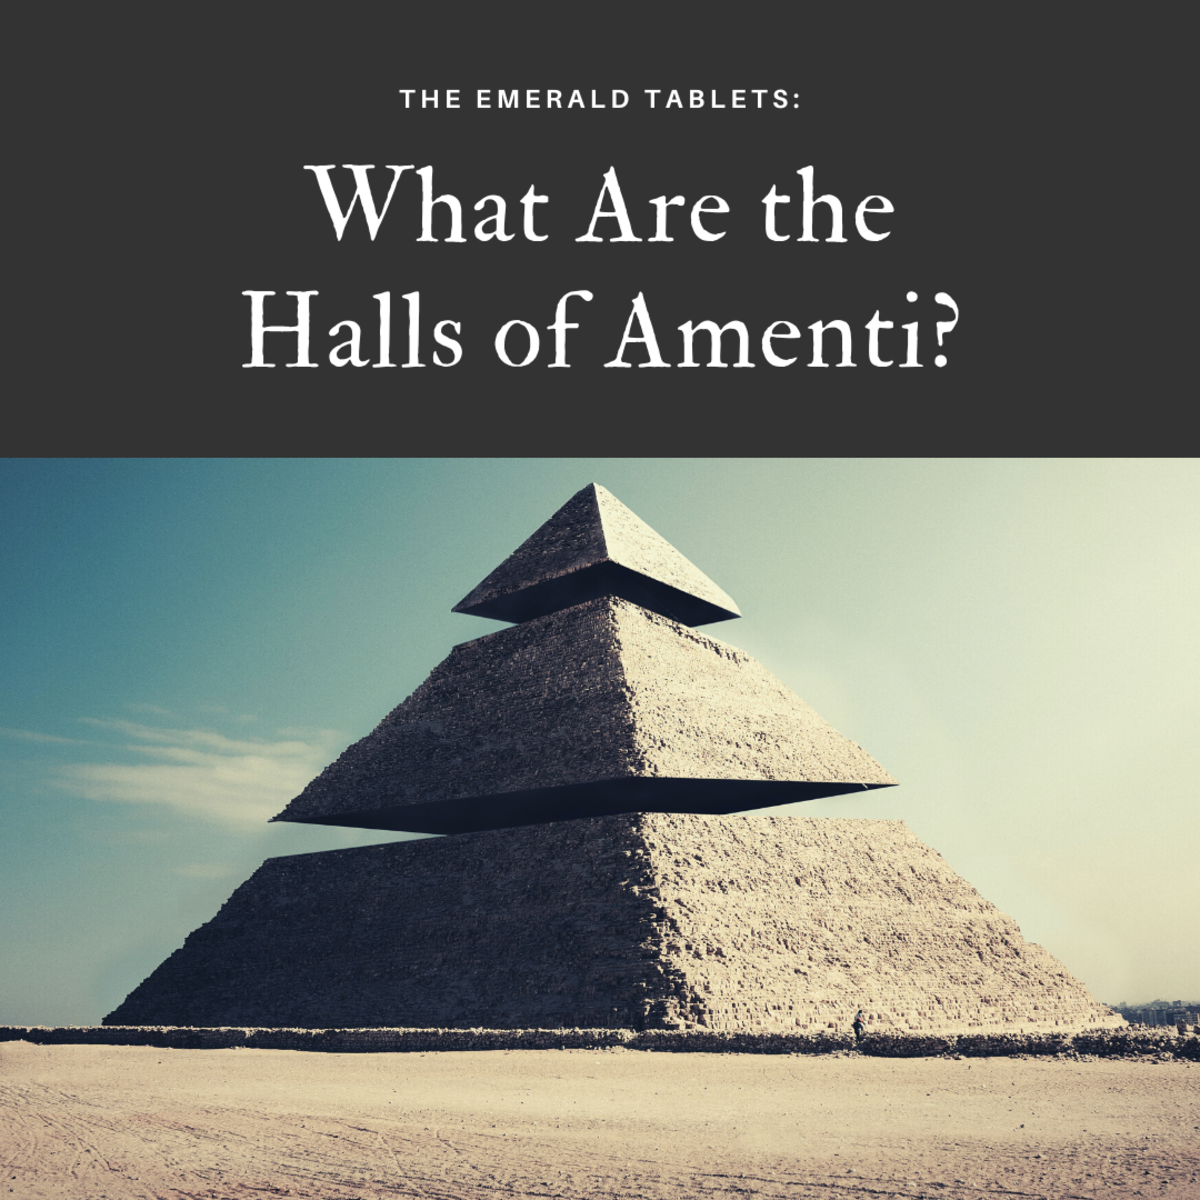 What Are the Halls of Amenti in the Emerald Tablets?